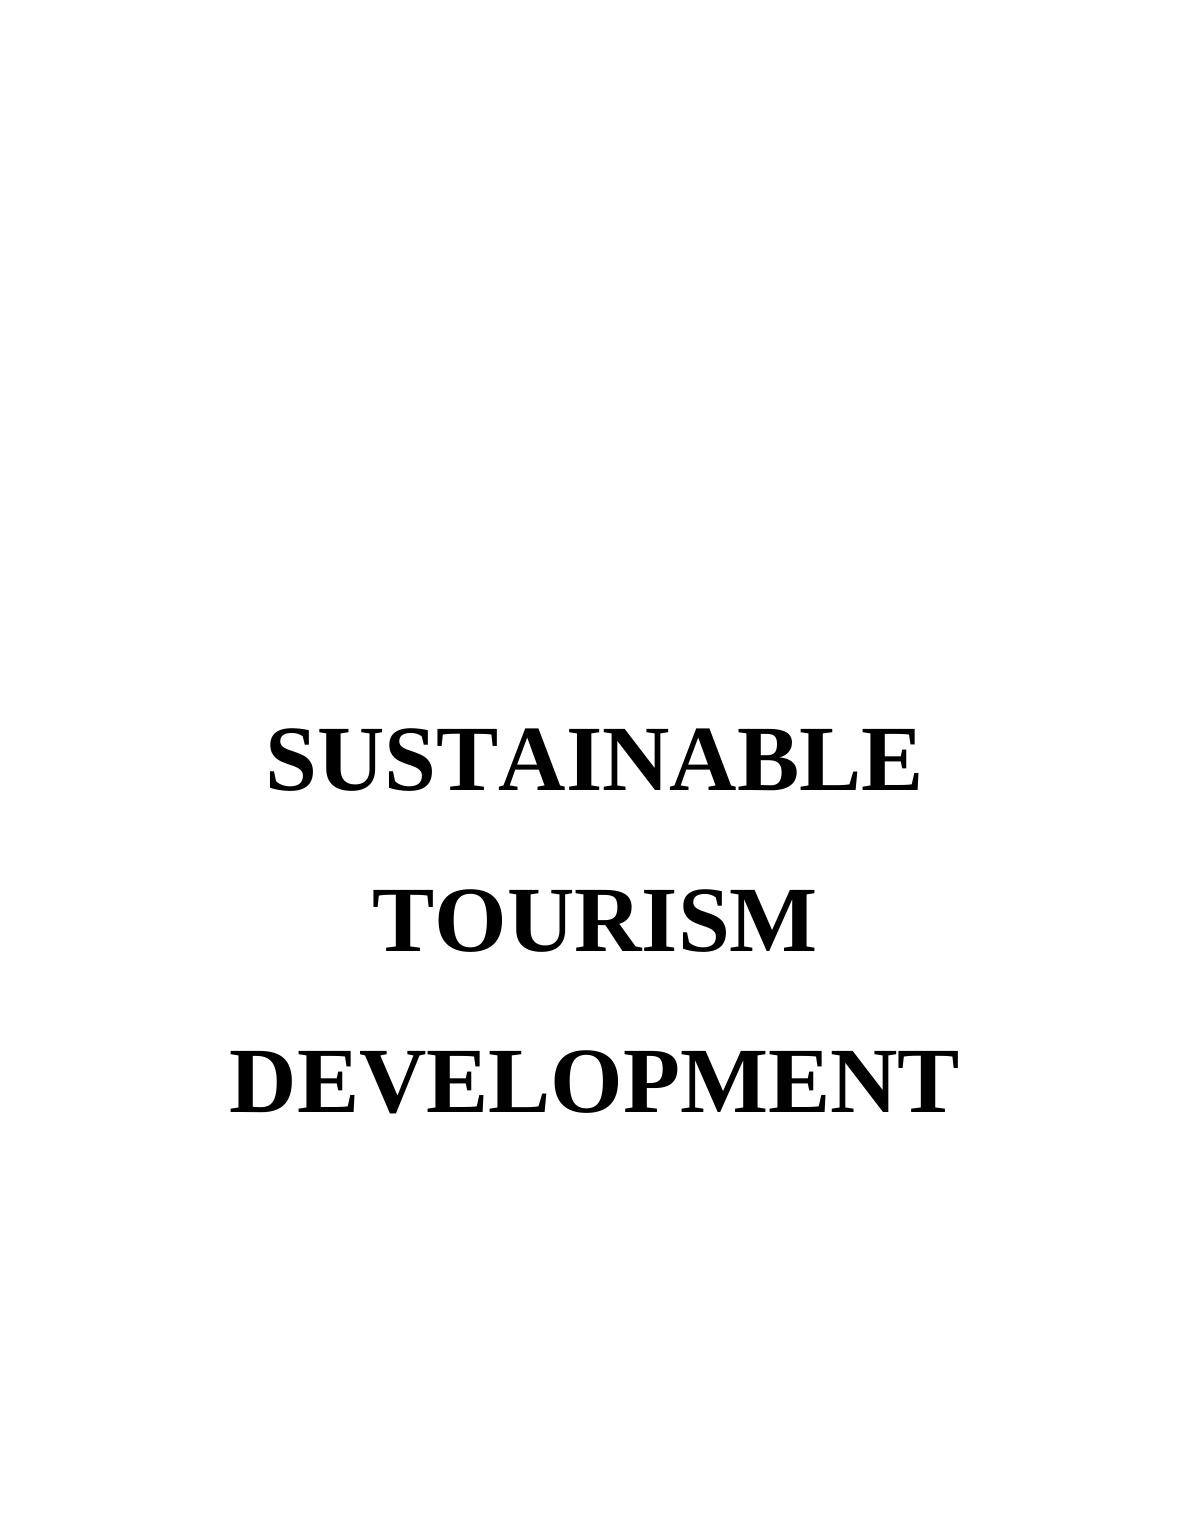 Tourism and Sustainable Development Assignment_1